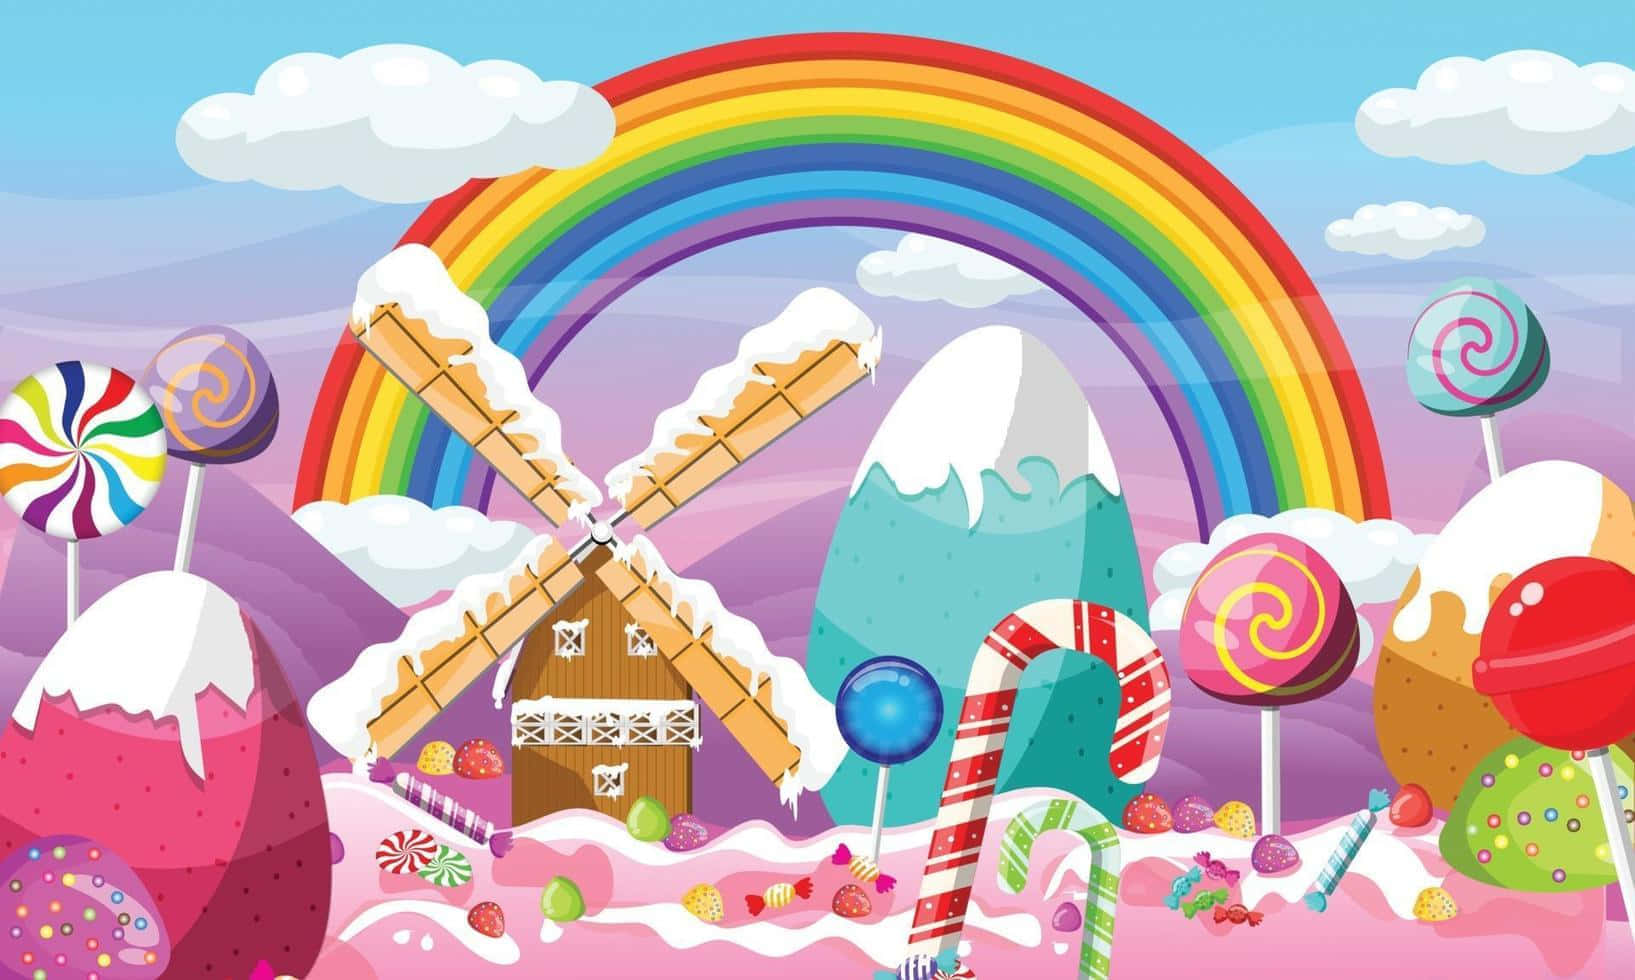 Welcome to Candyland, the land of color and sweetness!